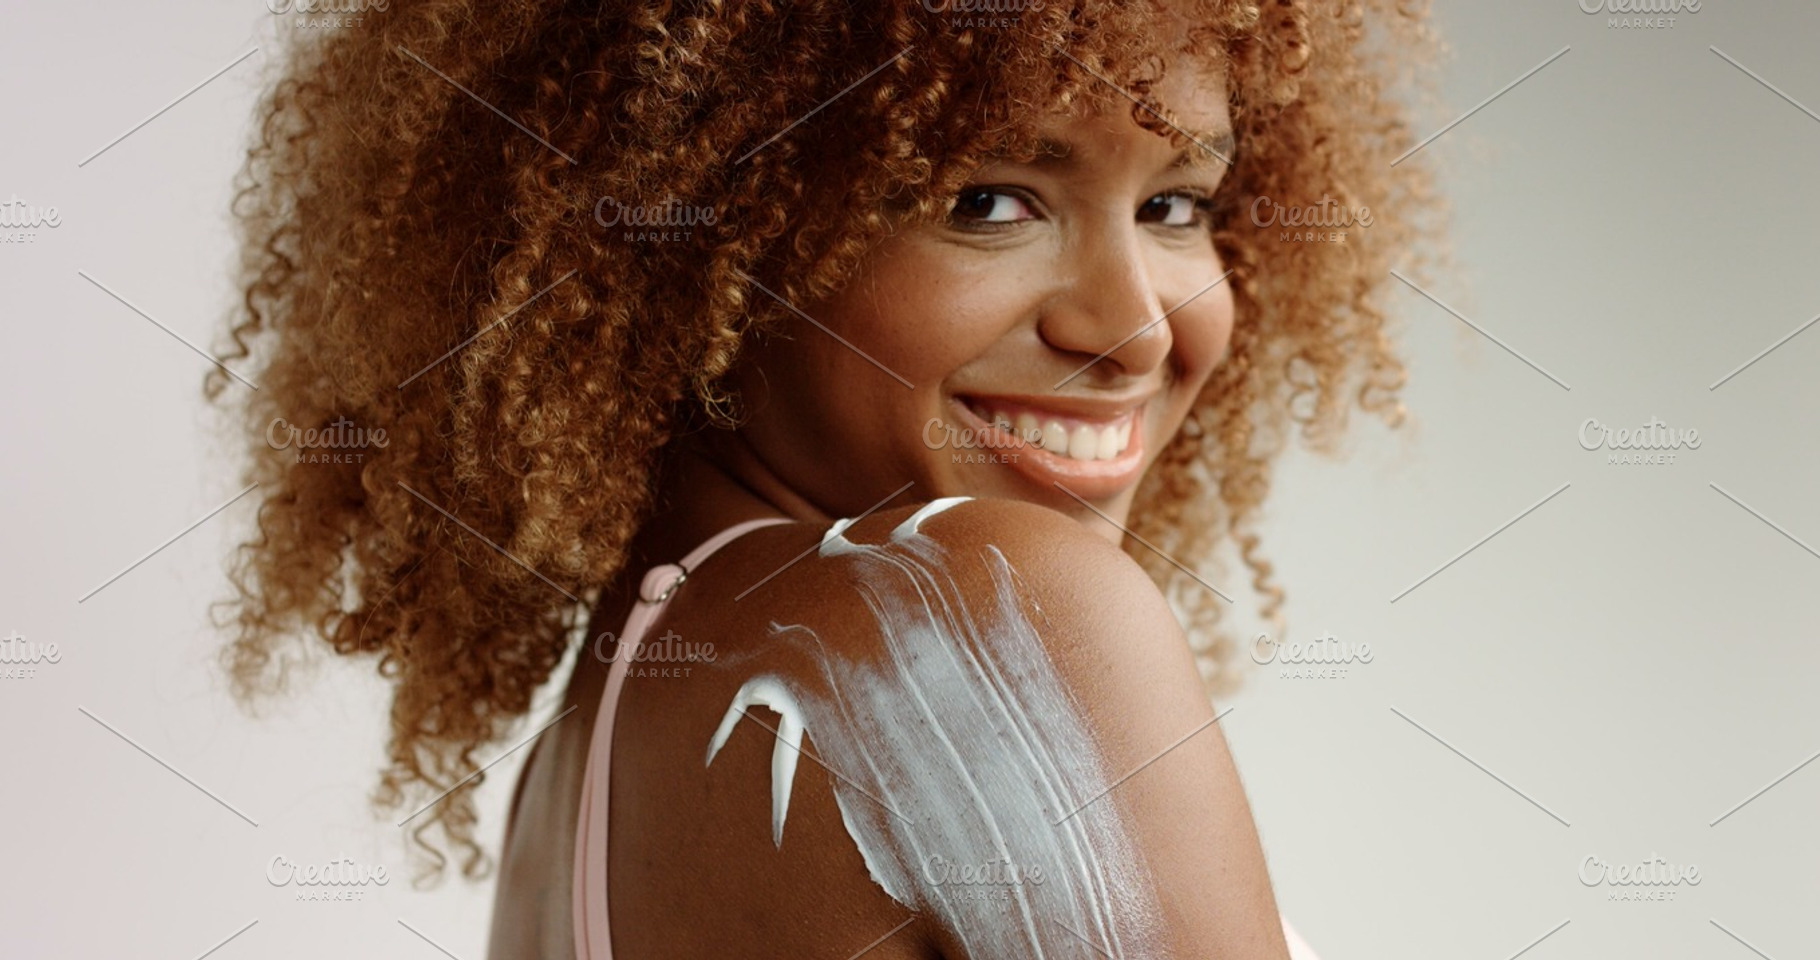 Mixed Race Black Woman With Blonde Curly Hair In Studio With Cream